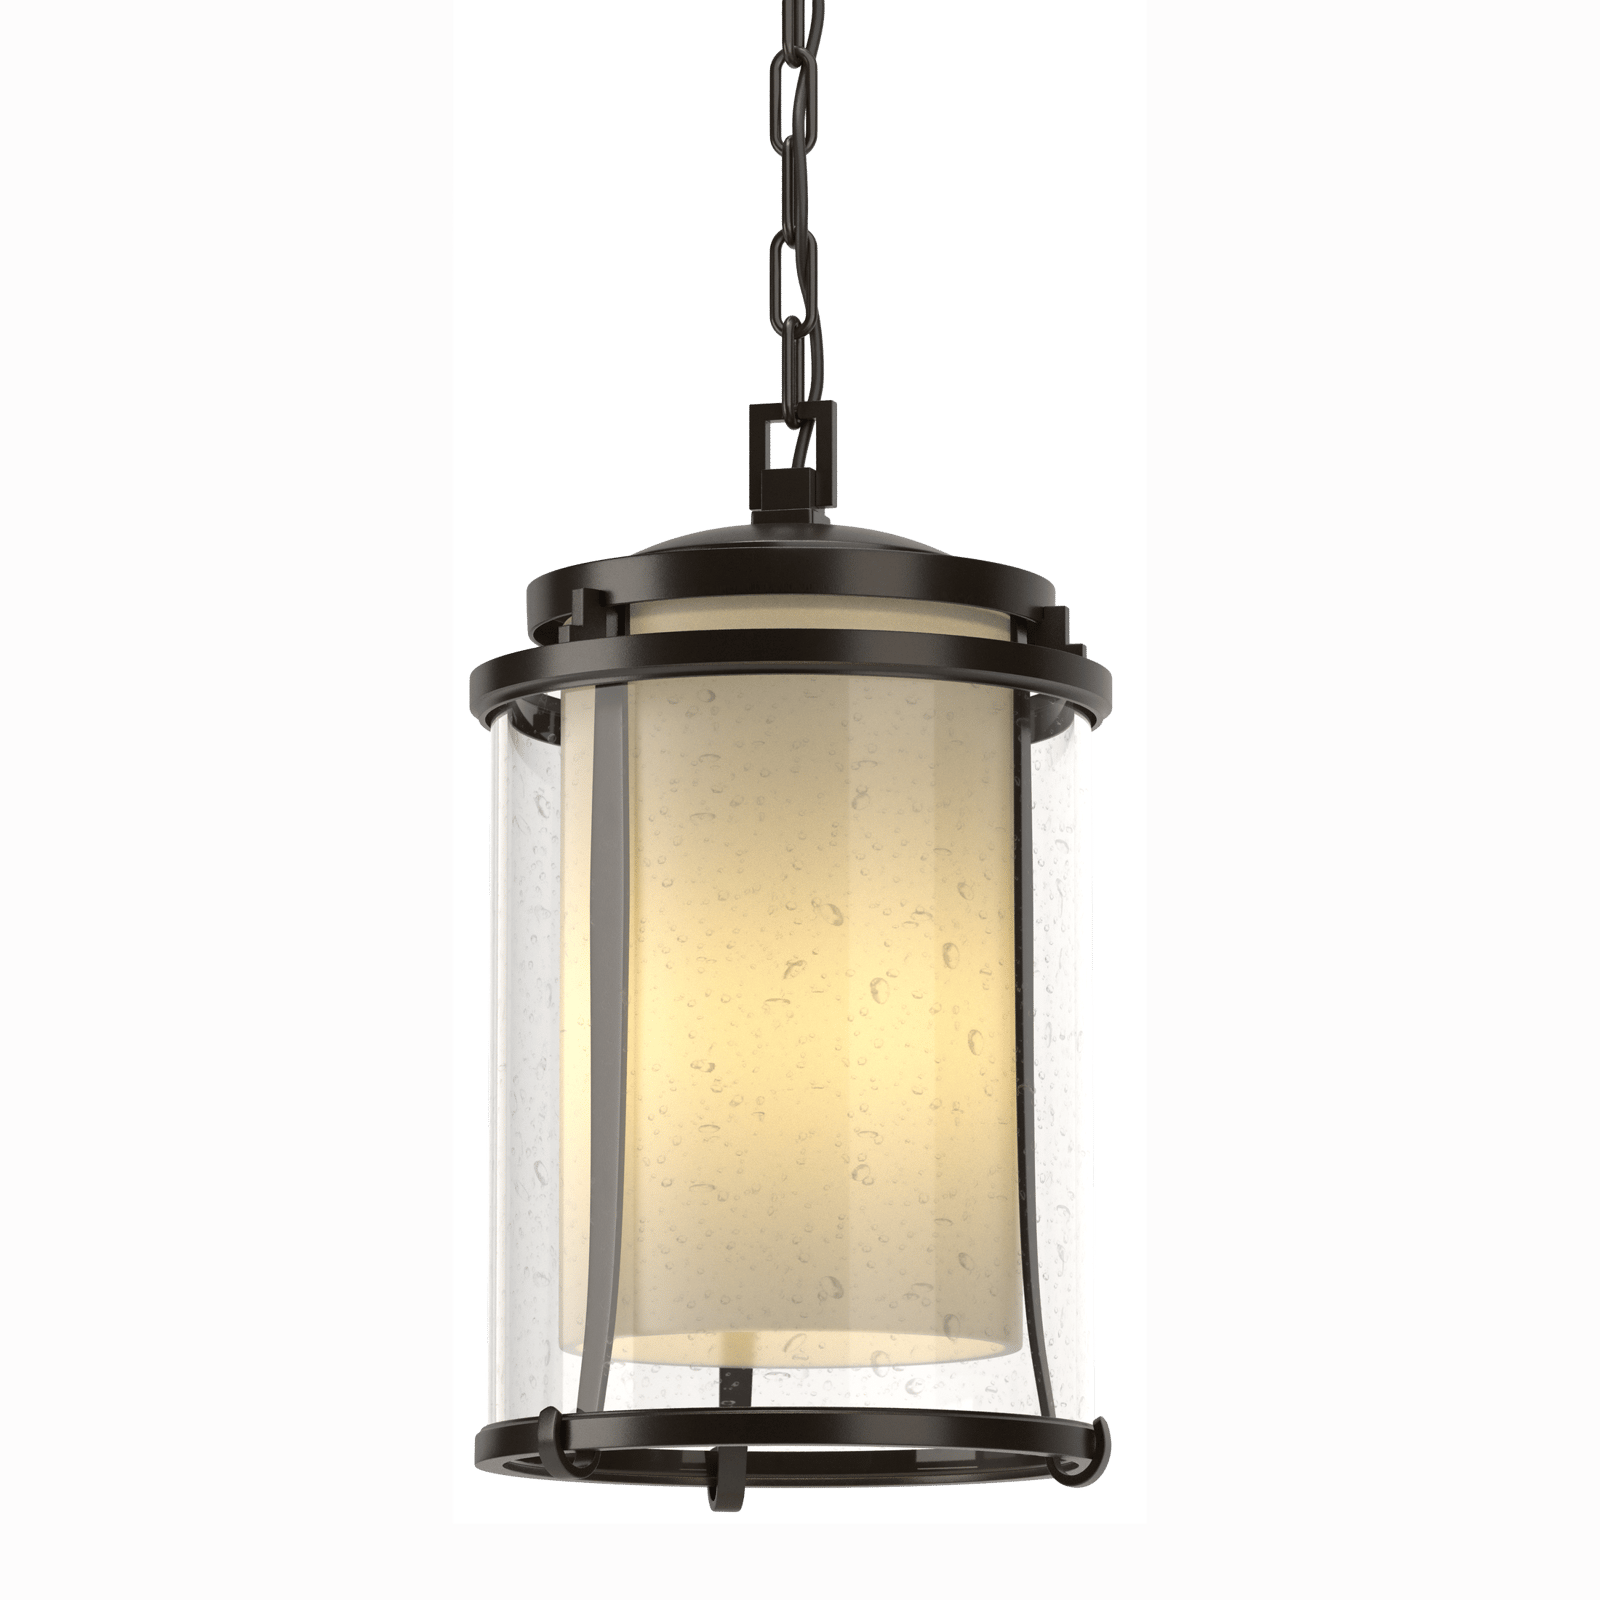 Hubbardton Forge Meridian Large Outdoor Ceiling Fixture